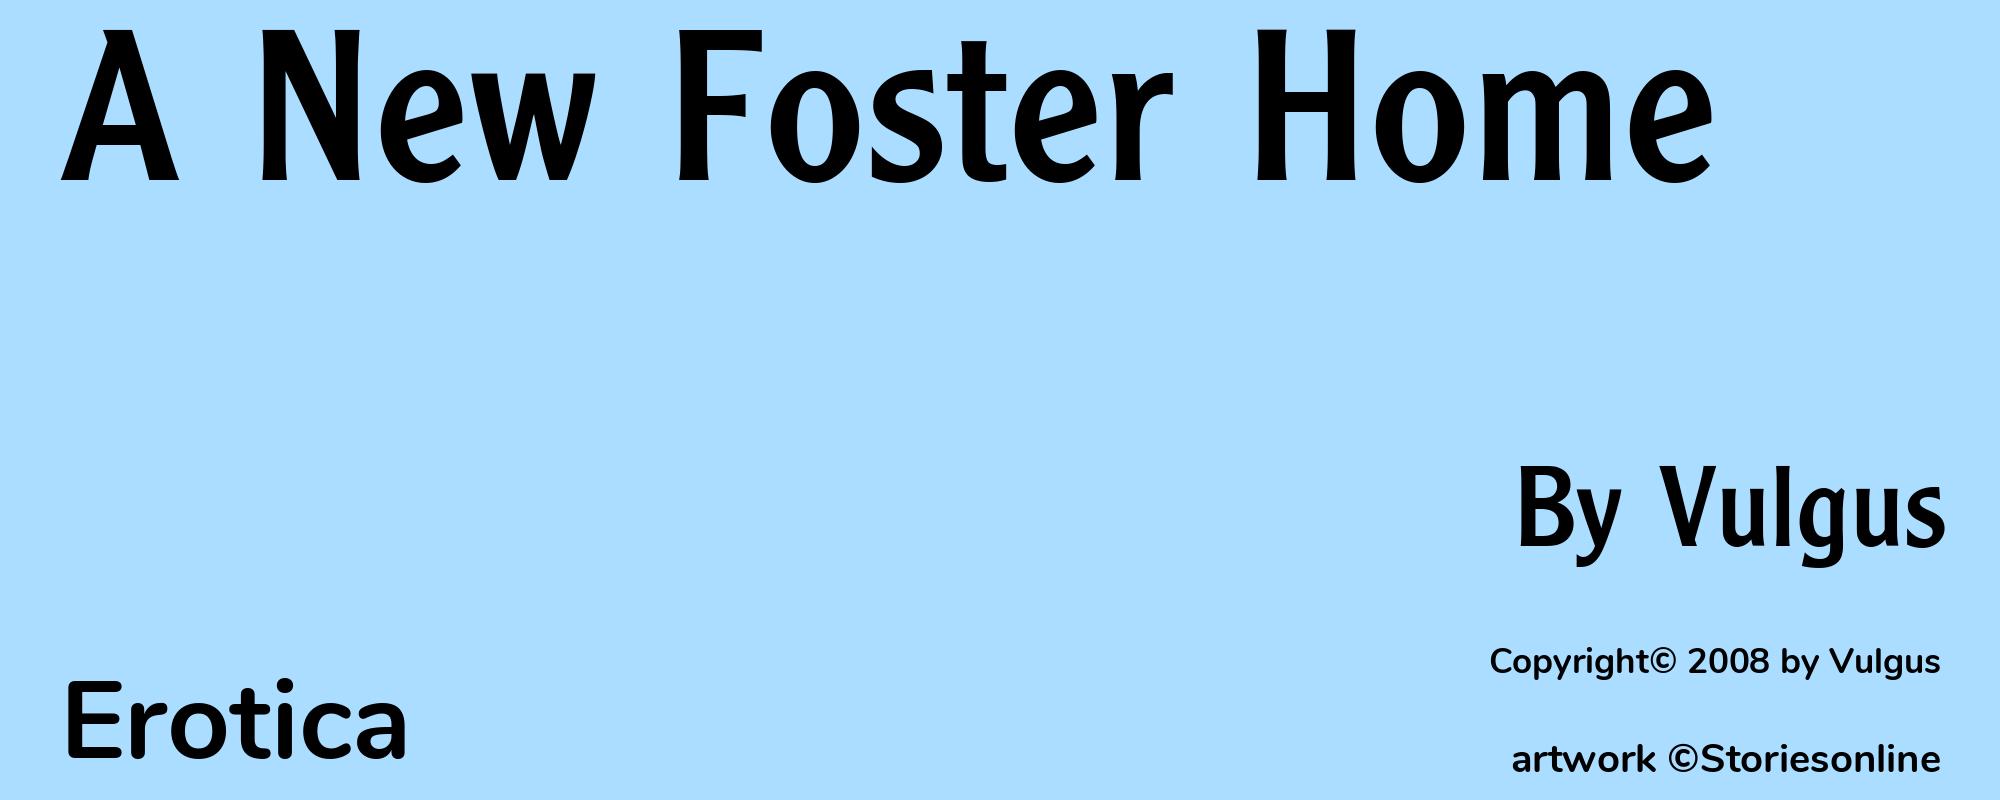 A New Foster Home - Cover